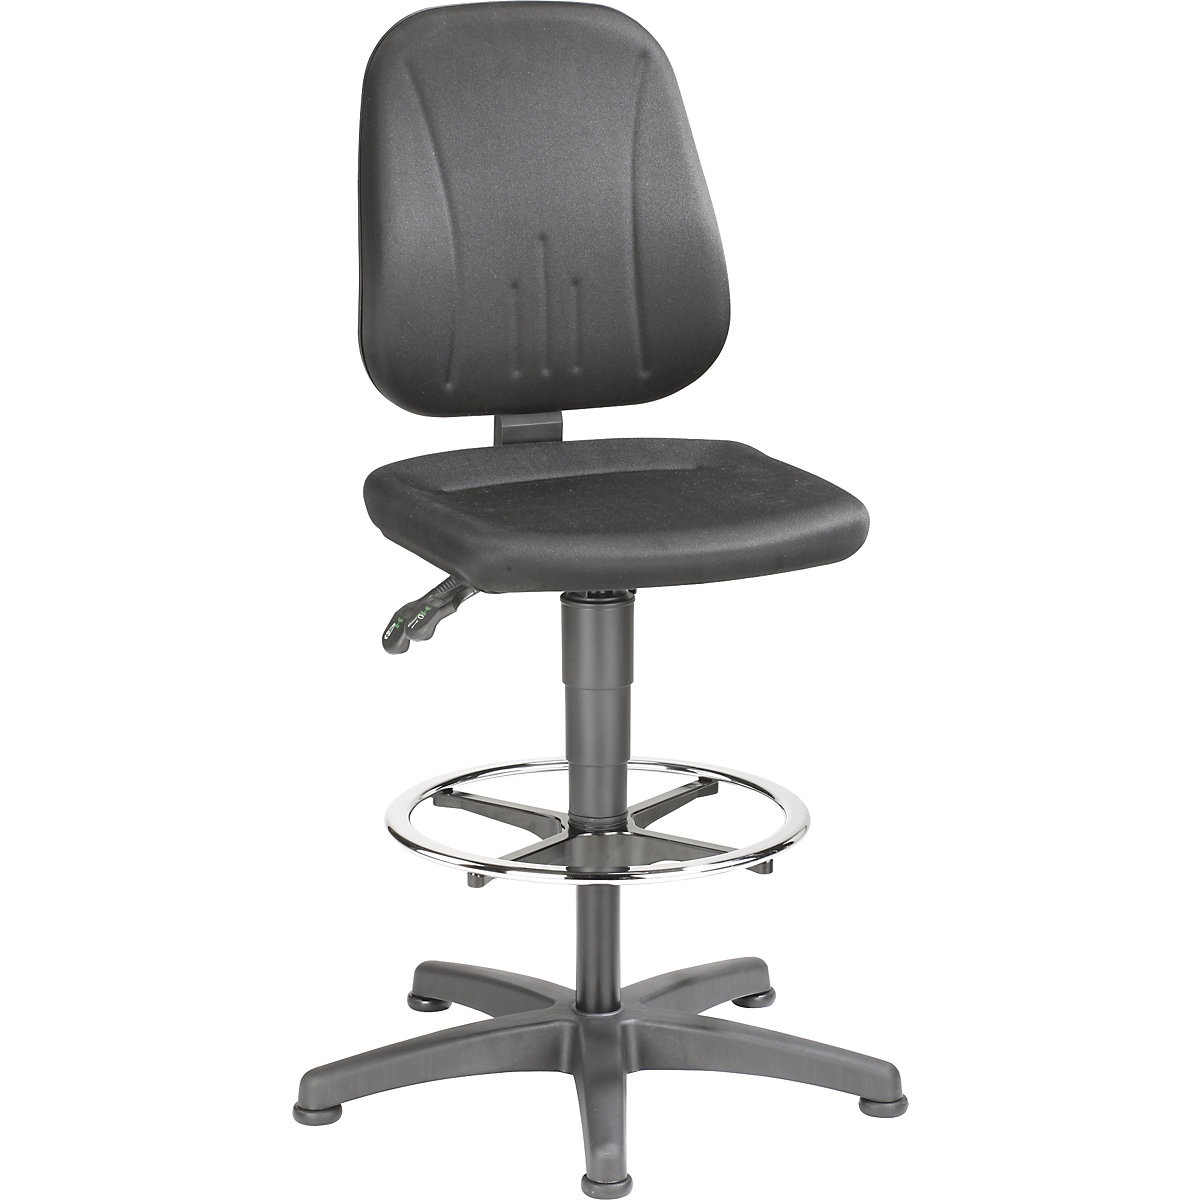 Industrial swivel chair – bimos, with gas lift height adjustment, fabric cover, black, with floor glides and foot ring-9